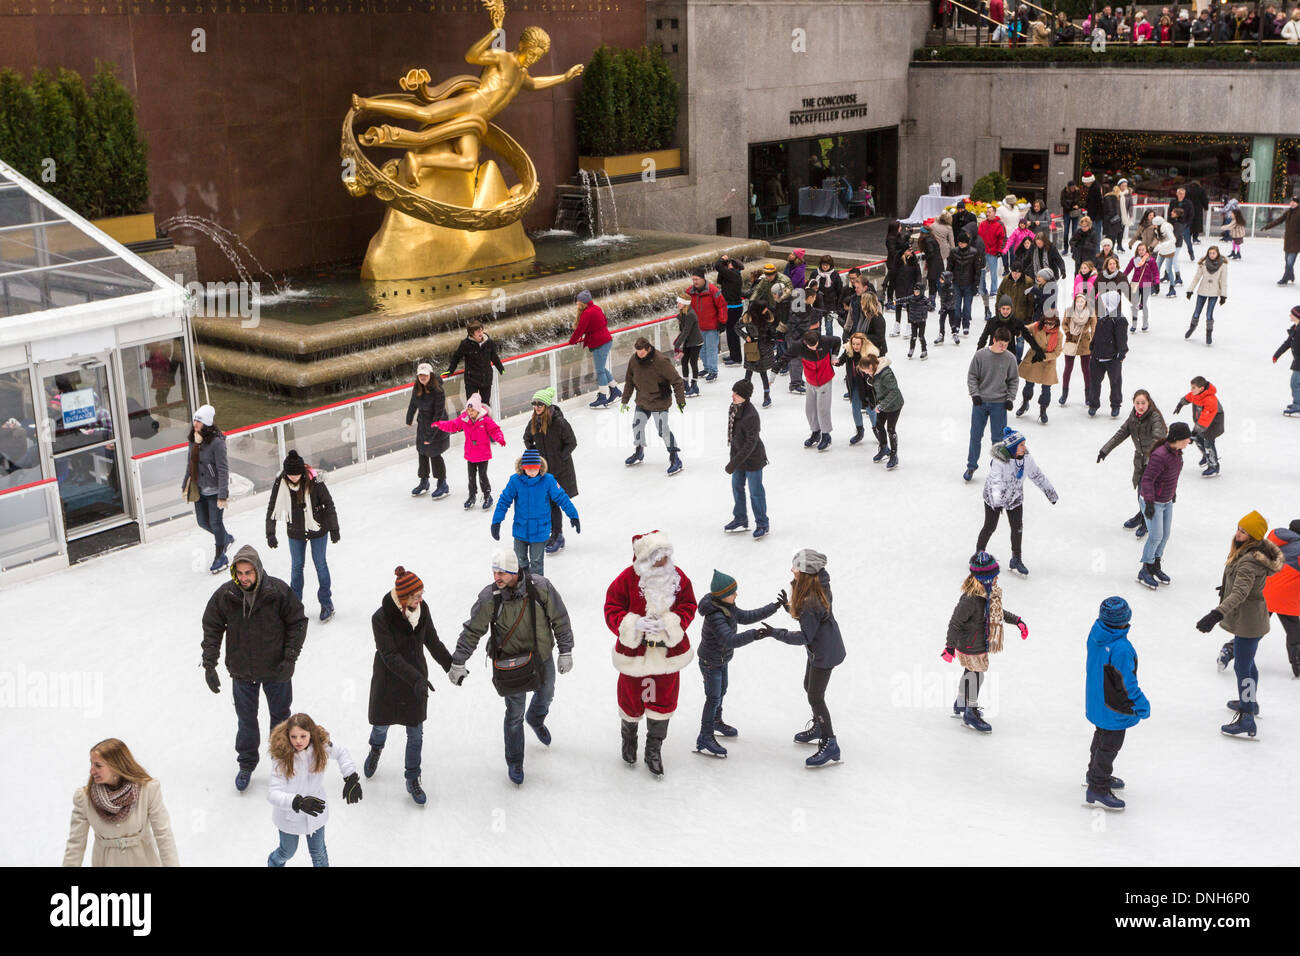 Ice skaters skating on the ice rink at The Concourse at the Rockefeller Center, New York, USA, with traditional Santa Claus Stock Photo